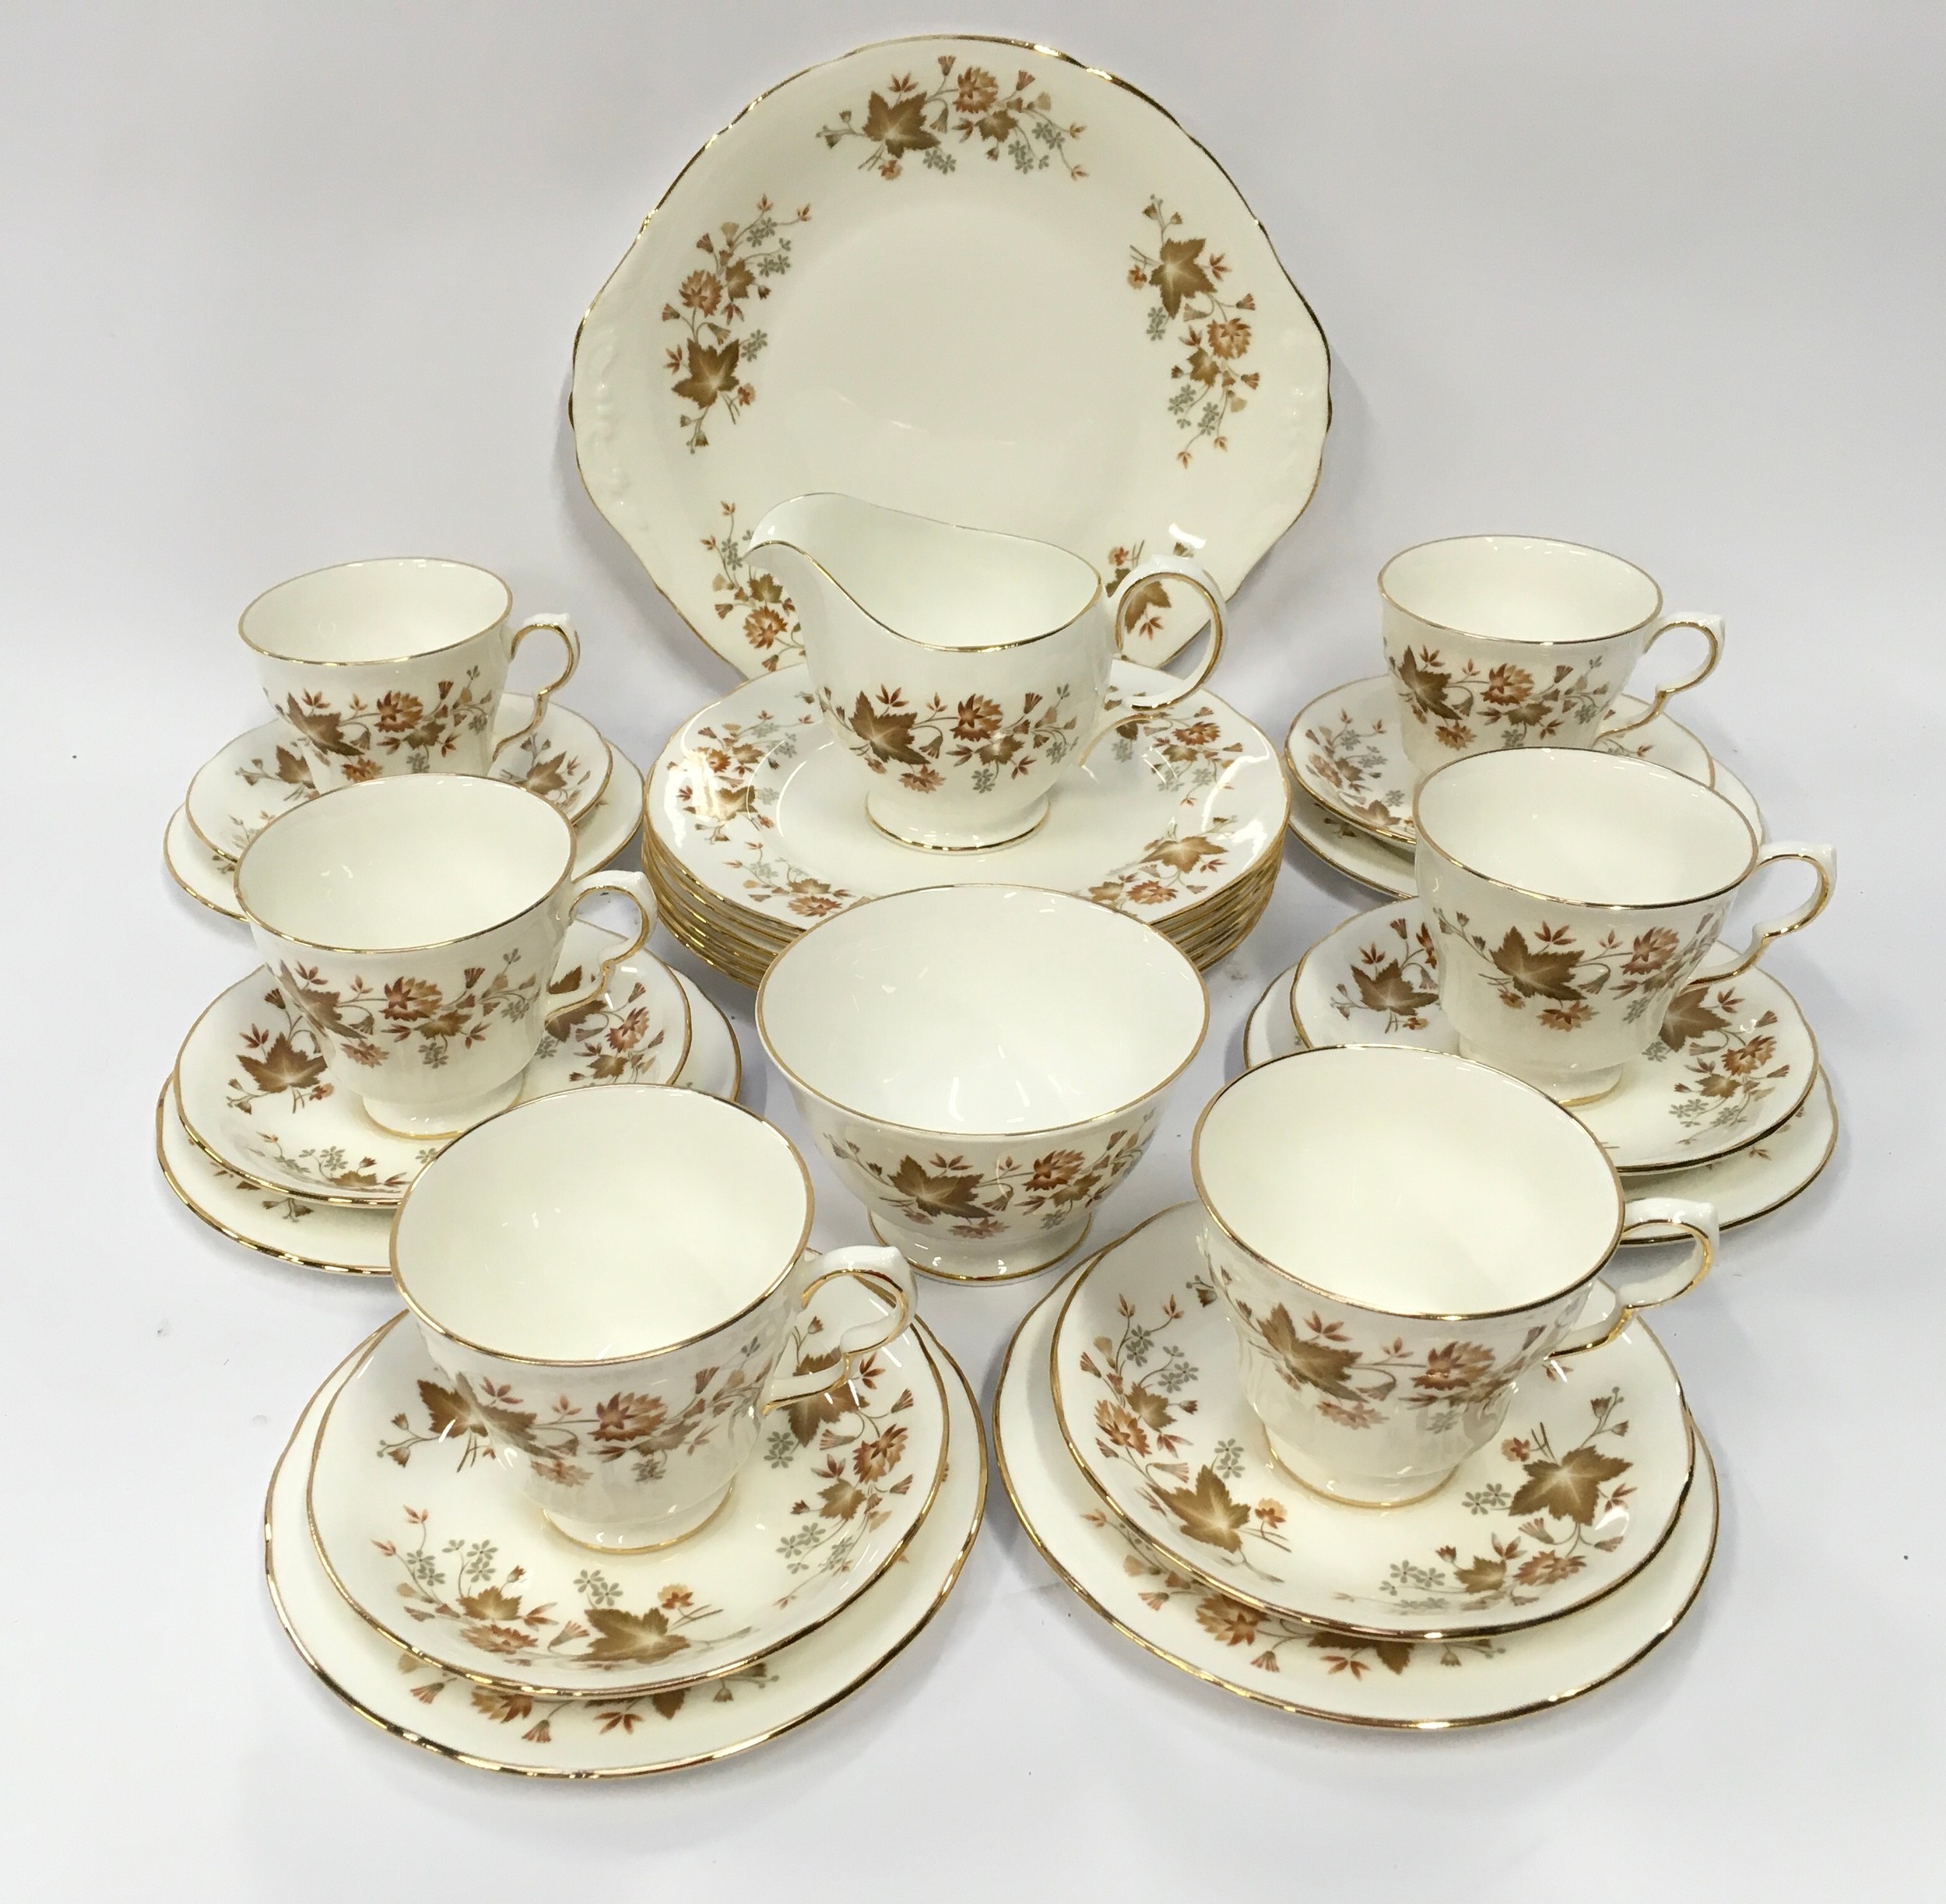 Colclough bone china tea service for 6 place settings in the Avon Autumn Leaves design.